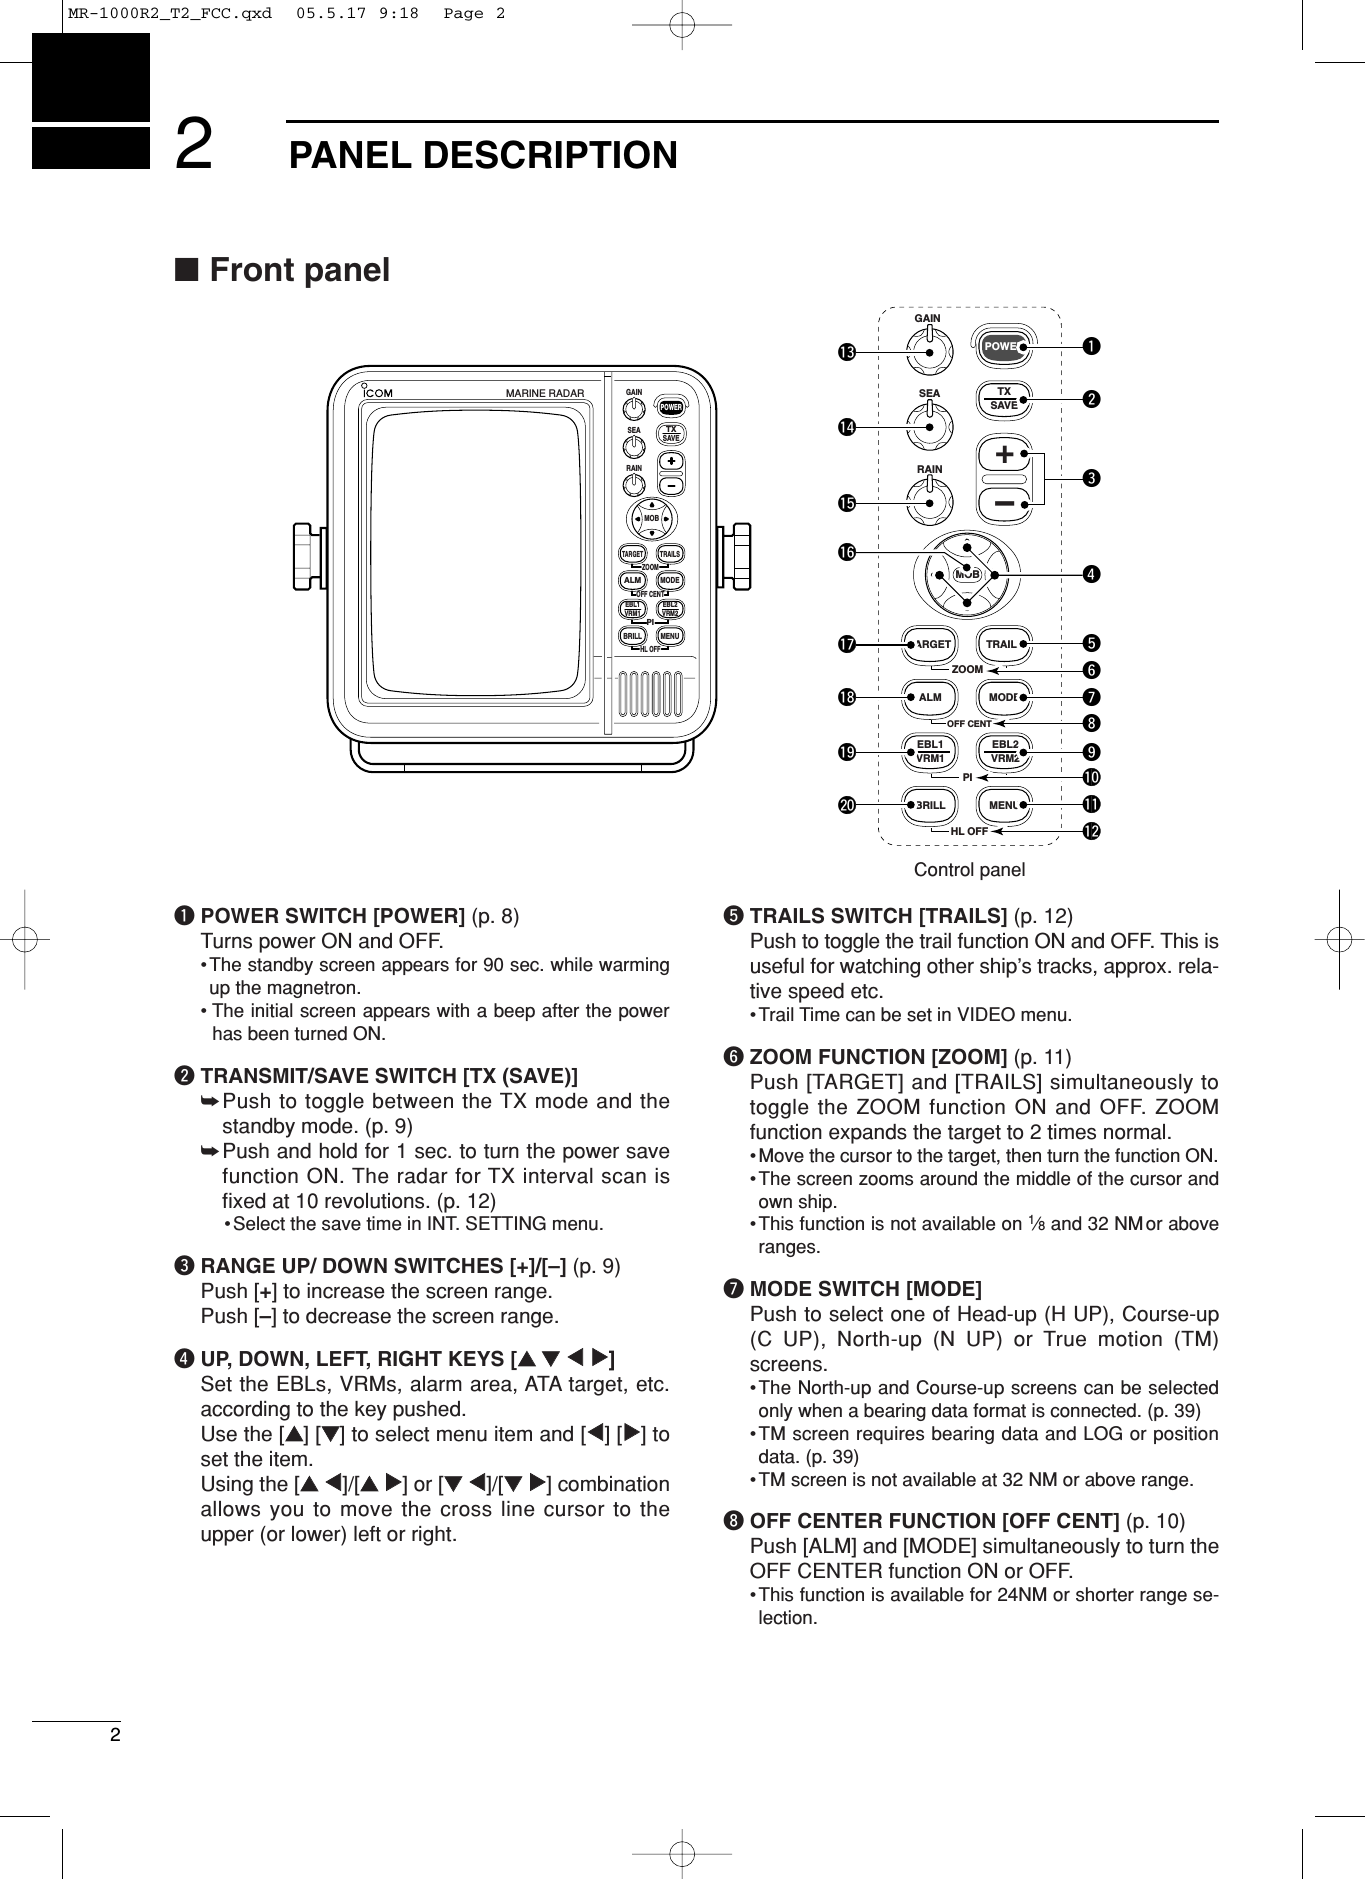 2PANEL DESCRIPTION2■Front panelqPOWER SWITCH [POWER] (p. 8)Turns power ON and OFF.•The standby screen appears for 90 sec. while warmingup the magnetron. • The initial screen appears with a beep after the powerhas been turned ON.wTRANSMIT/SAVE SWITCH [TX (SAVE)]➥Push to toggle between the TX mode and thestandby mode. (p. 9)➥Push and hold for 1 sec. to turn the power savefunction ON. The radar for TX interval scan isﬁxed at 10 revolutions. (p. 12)•Select the save time in INT. SETTING menu.eRANGE UP/ DOWN SWITCHES [+]/[–] (p. 9)Push [+] to increase the screen range. Push [–] to decrease the screen range.rUP, DOWN, LEFT, RIGHT KEYS [ÙÙ ÚÚ ΩΩ≈≈]]Set the EBLs, VRMs, alarm area, ATA target, etc.according to the key pushed.Use the [ÙÙ] [ÚÚ] to select menu item and [ΩΩ] [≈≈] toset the item.Using the [ÙÙ ΩΩ]/[ÙÙ ≈≈] or [ÚÚ ΩΩ]/[ÚÚ ≈≈] combinationallows you to move the cross line cursor to theupper (or lower) left or right.tTRAILS SWITCH [TRAILS] (p. 12)Push to toggle the trail function ON and OFF. This isuseful for watching other ship’s tracks, approx. rela-tive speed etc.•Trail Time can be set in VIDEO menu.yZOOM FUNCTION [ZOOM] (p. 11)Push [TARGET] and [TRAILS] simultaneously totoggle the ZOOM function ON and OFF. ZOOMfunction expands the target to 2 times normal.•Move the cursor to the target, then turn the function ON.•The screen zooms around the middle of the cursor andown ship.•This function is not available on 1⁄8and 32 NM or aboveranges.uMODE SWITCH [MODE]Push to select one of Head-up (H UP), Course-up(C UP), North-up (N UP) or True motion (TM)screens. •The North-up and Course-up screens can be selectedonly when a bearing data format is connected. (p. 39)•TM screen requires bearing data and LOG or positiondata. (p. 39)•TM screen is not available at 32 NM or above range.iOFF CENTER FUNCTION [OFF CENT] (p. 10)Push [ALM] and [MODE] simultaneously to turn theOFF CENTER function ON or OFF. •This function is available for 24NM or shorter range se-lection.MOBGAINSEARAINPOWERTXSAVETARGETTRAILSZOOMALMMODEOFF CENTEBL1VRM1PIBRILL MENUHL OFFEBL2VRM2MARINE RADAR TXSAVETARGET TRAILSMODEALM+-MOBMENUEBL2VRM2EBL1VRM1BRILLZOOMOFF CENTPIHL OFFGAINSEARAINPOWERerqwtuo!1yi!2!3!4!5!6!7!8!9@0!0Control panelMR-1000R2_T2_FCC.qxd  05.5.17 9:18  Page 2